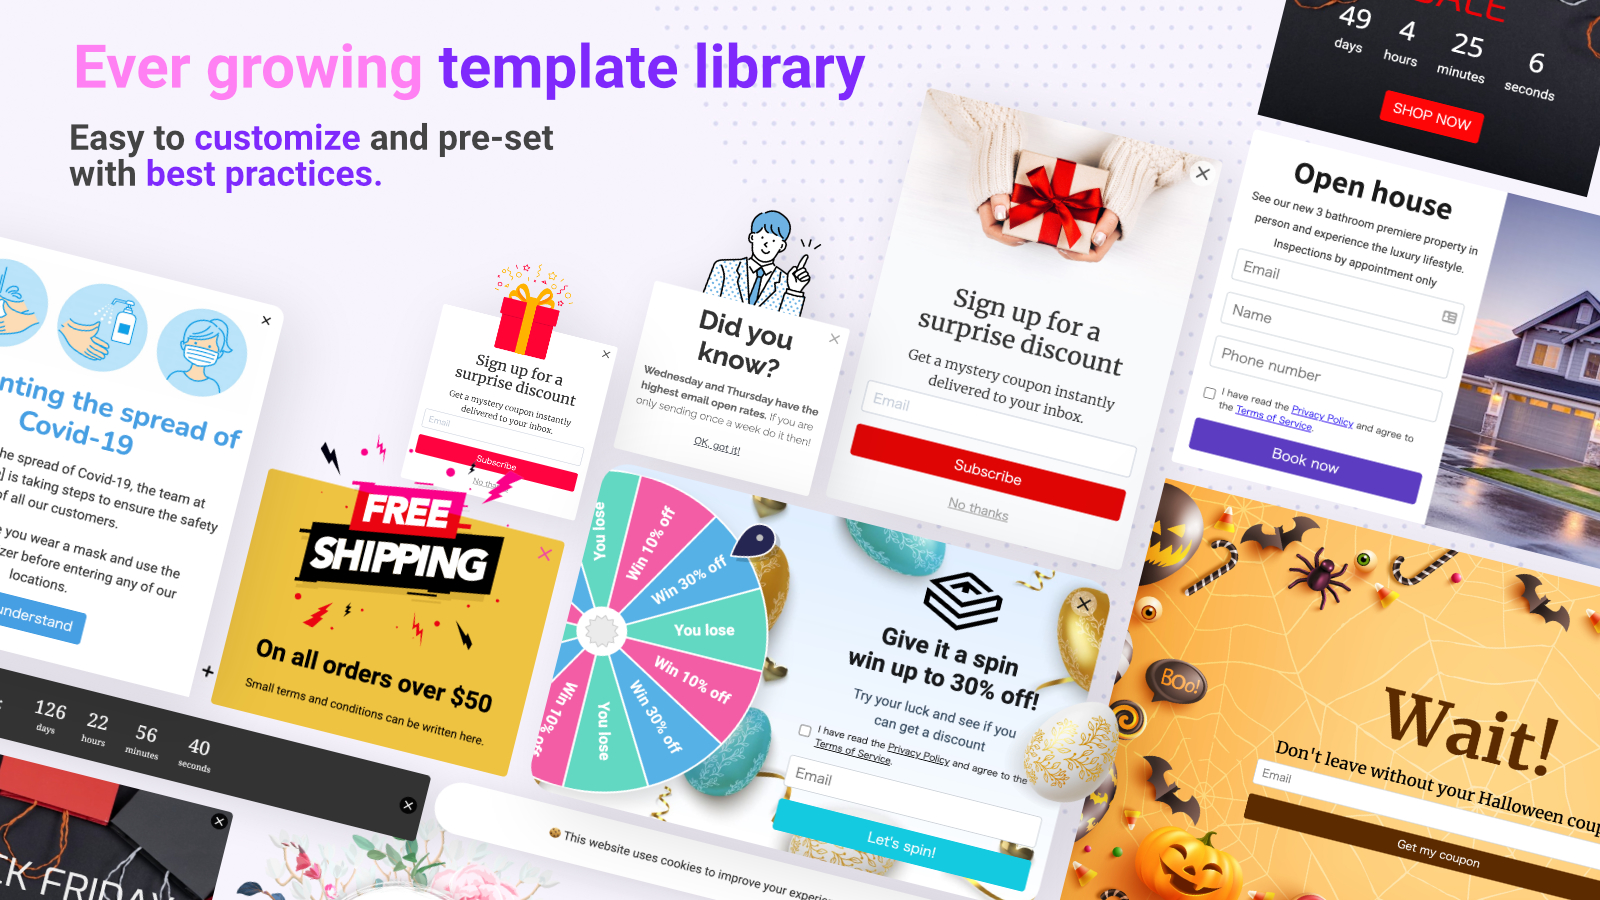 Promolayer.io Over 350 templates to make getting started easy